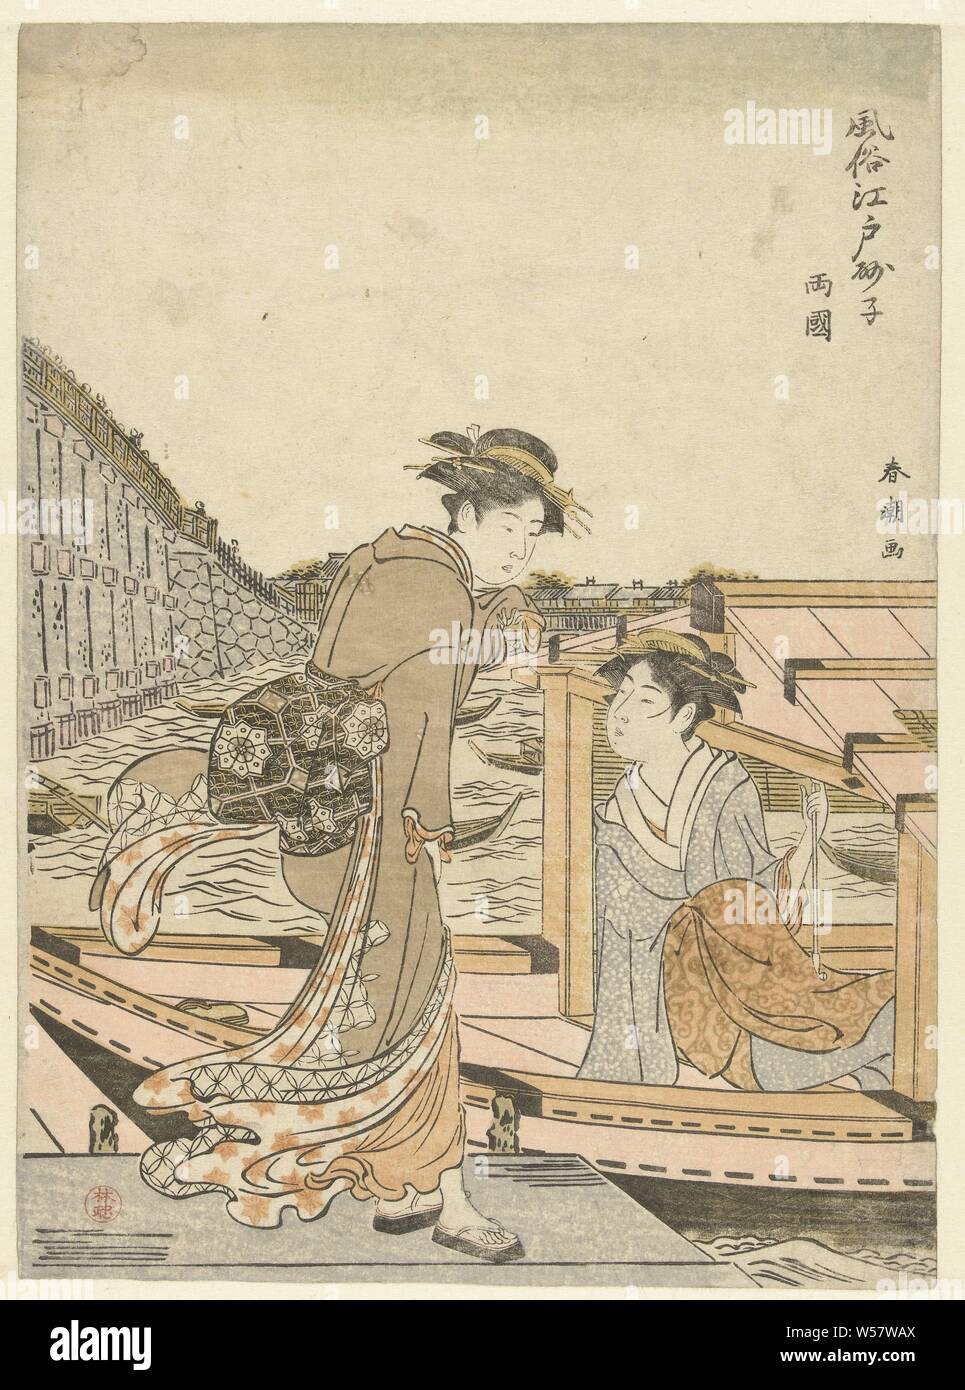 At the Ryogoku bridge Ryogoku (title on object) Fuzoku Edo sunago (series title on object), Young woman on jetty at the Roygoku bridge, talking with woman with pipe in left hand, sitting in boat, in the background boats on the river Sumida., Katsukawa Shuncho (mentioned on object), Japan, 1783 - 1787, paper, colour woodcut, h 261 mm × w 190 mm Stock Photo